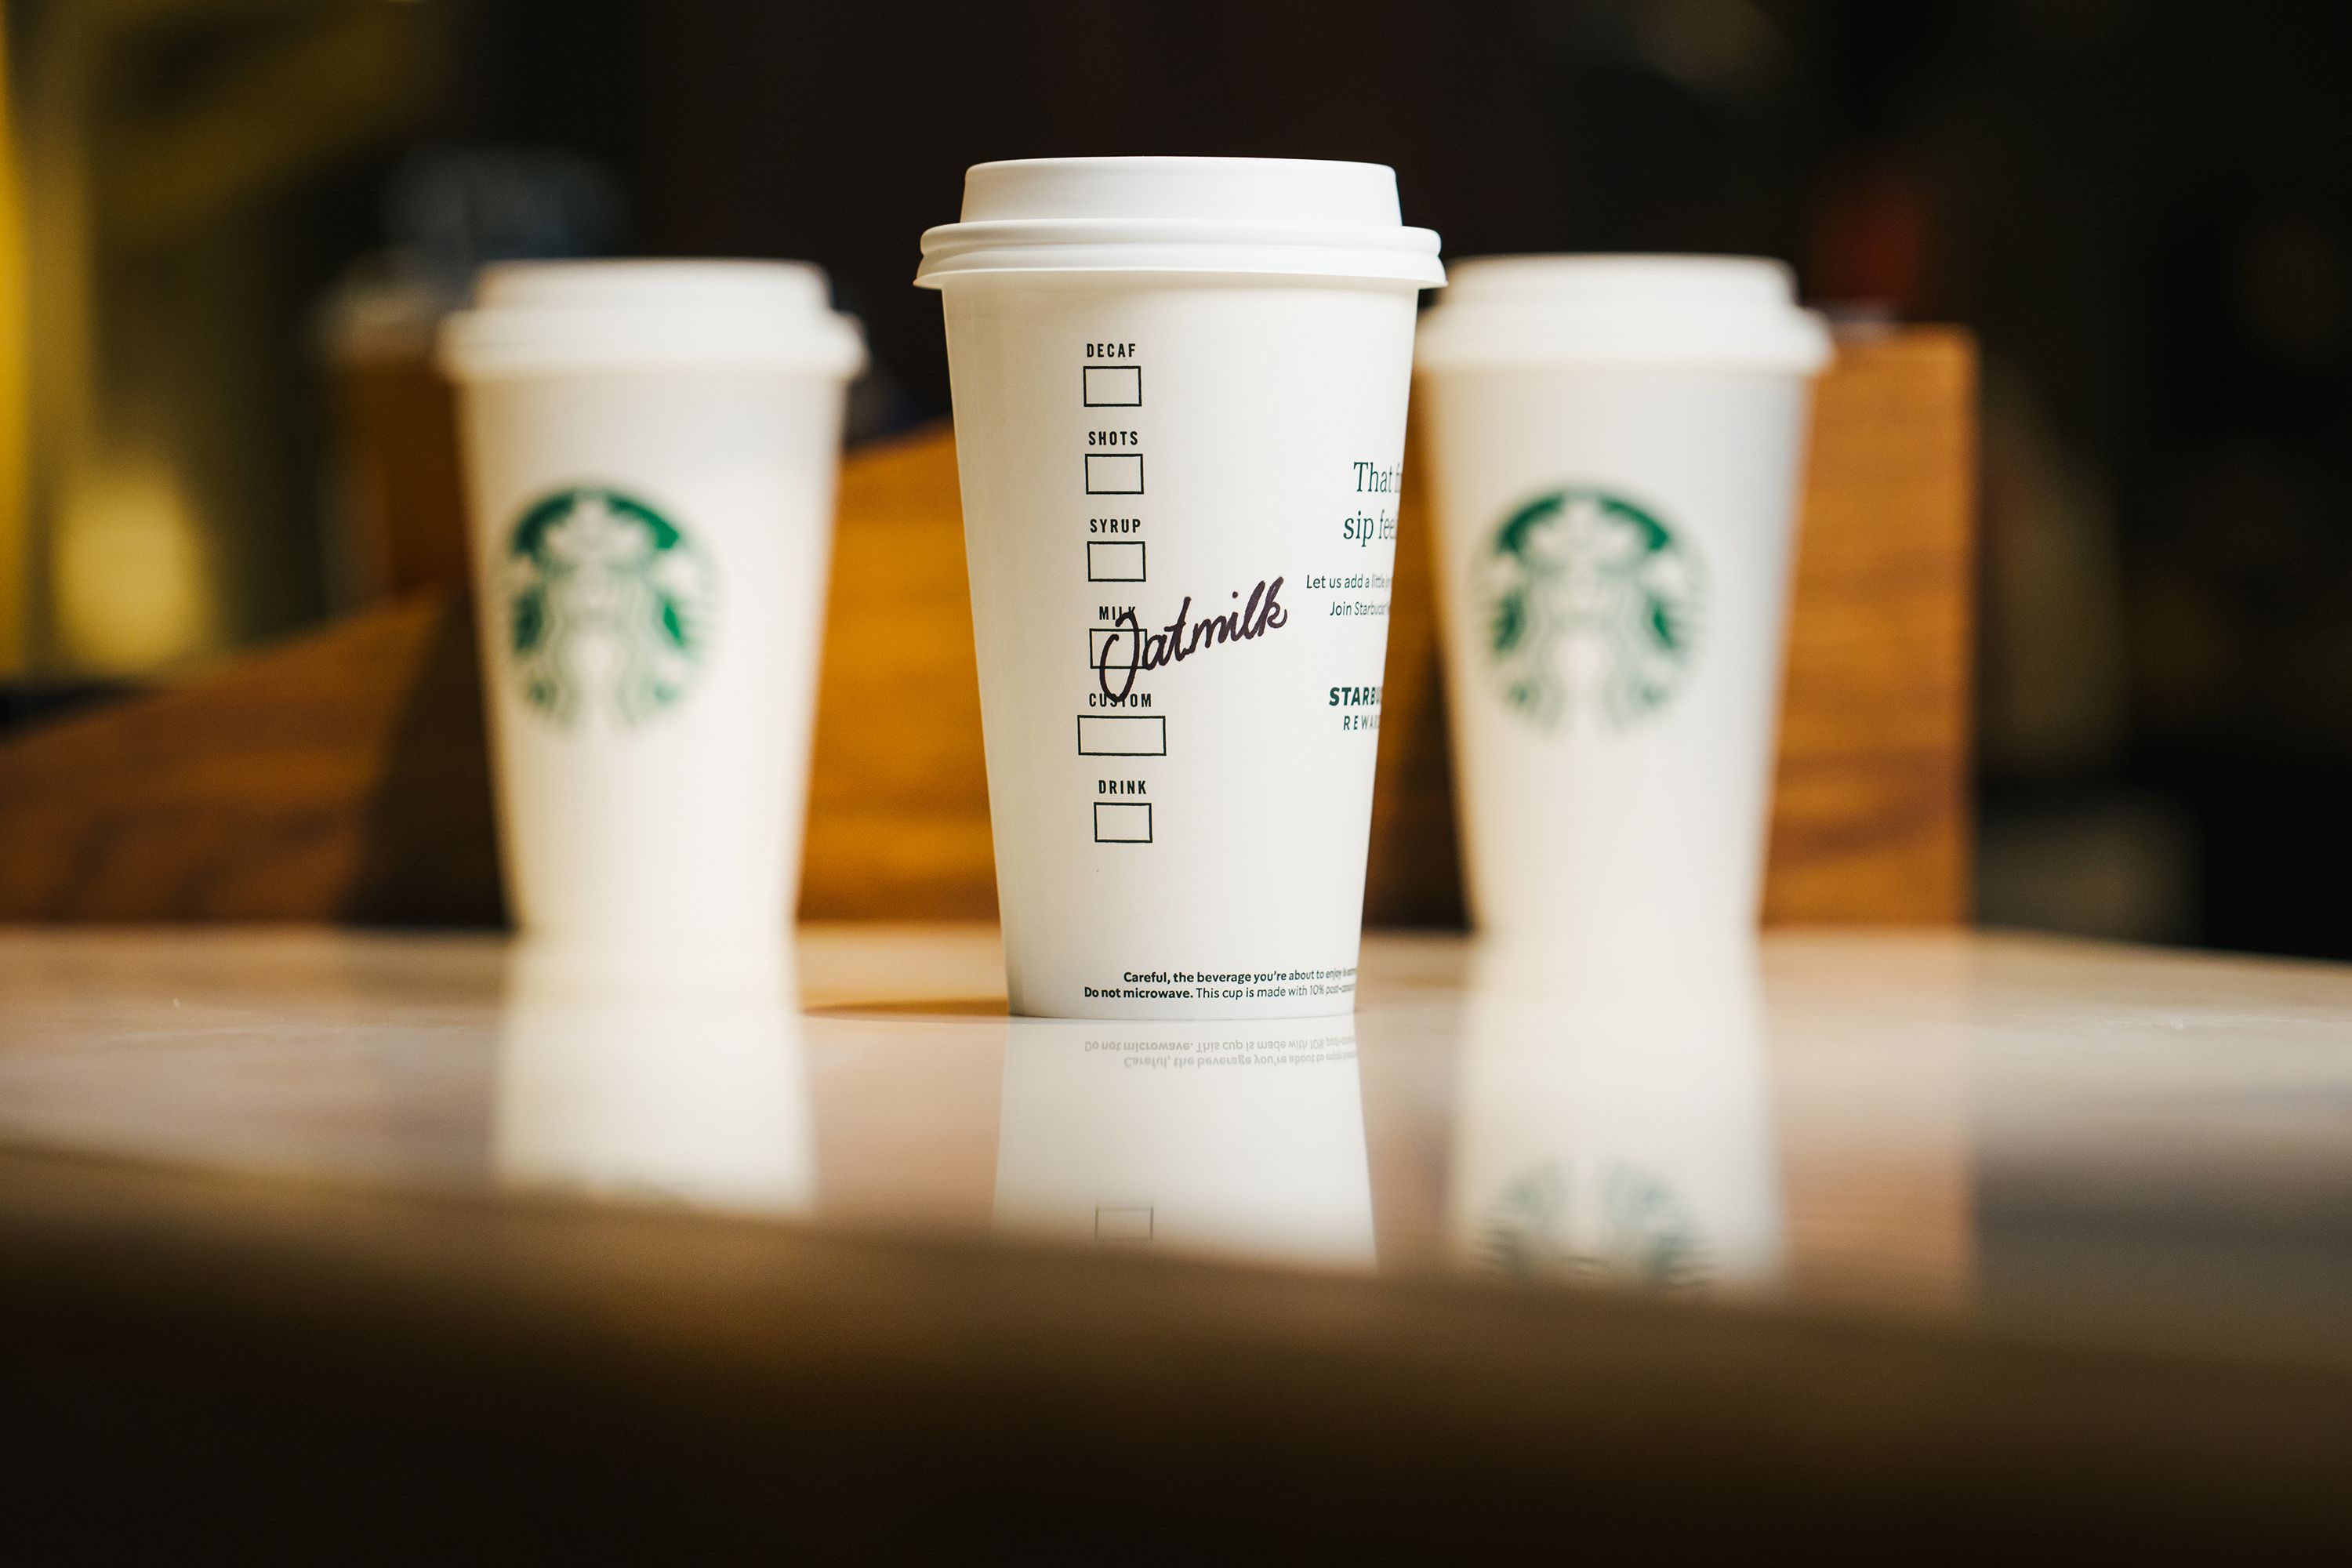 Why are lattes often served in big, wide cups? - Coffee Stack Exchange